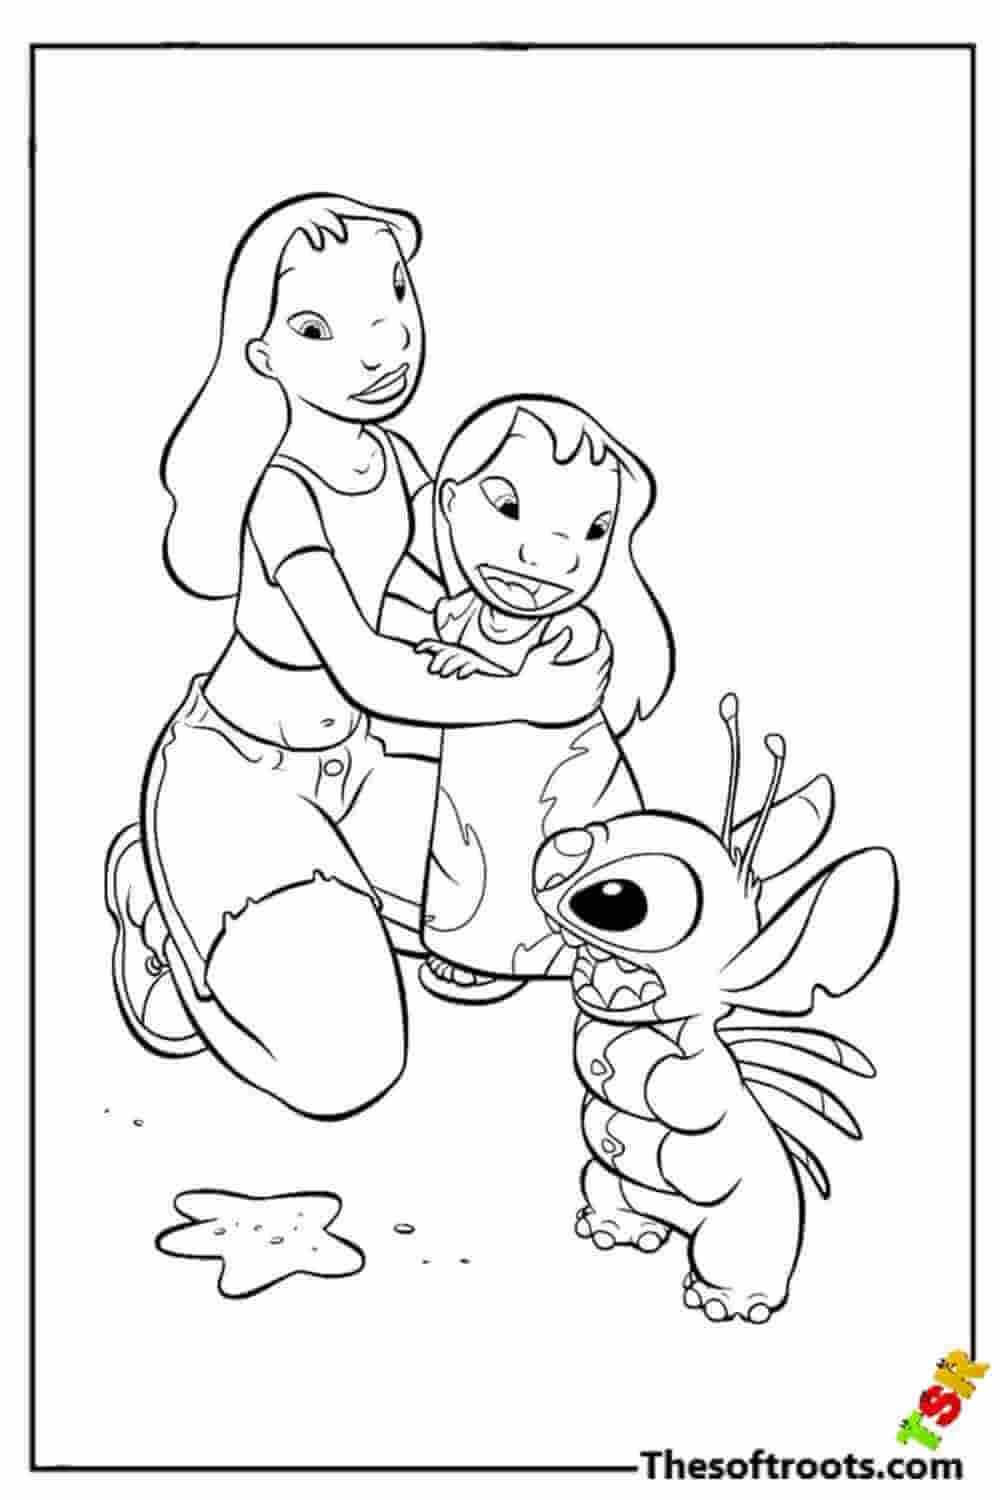 Nina, Lilo, and Stitch coloring pages